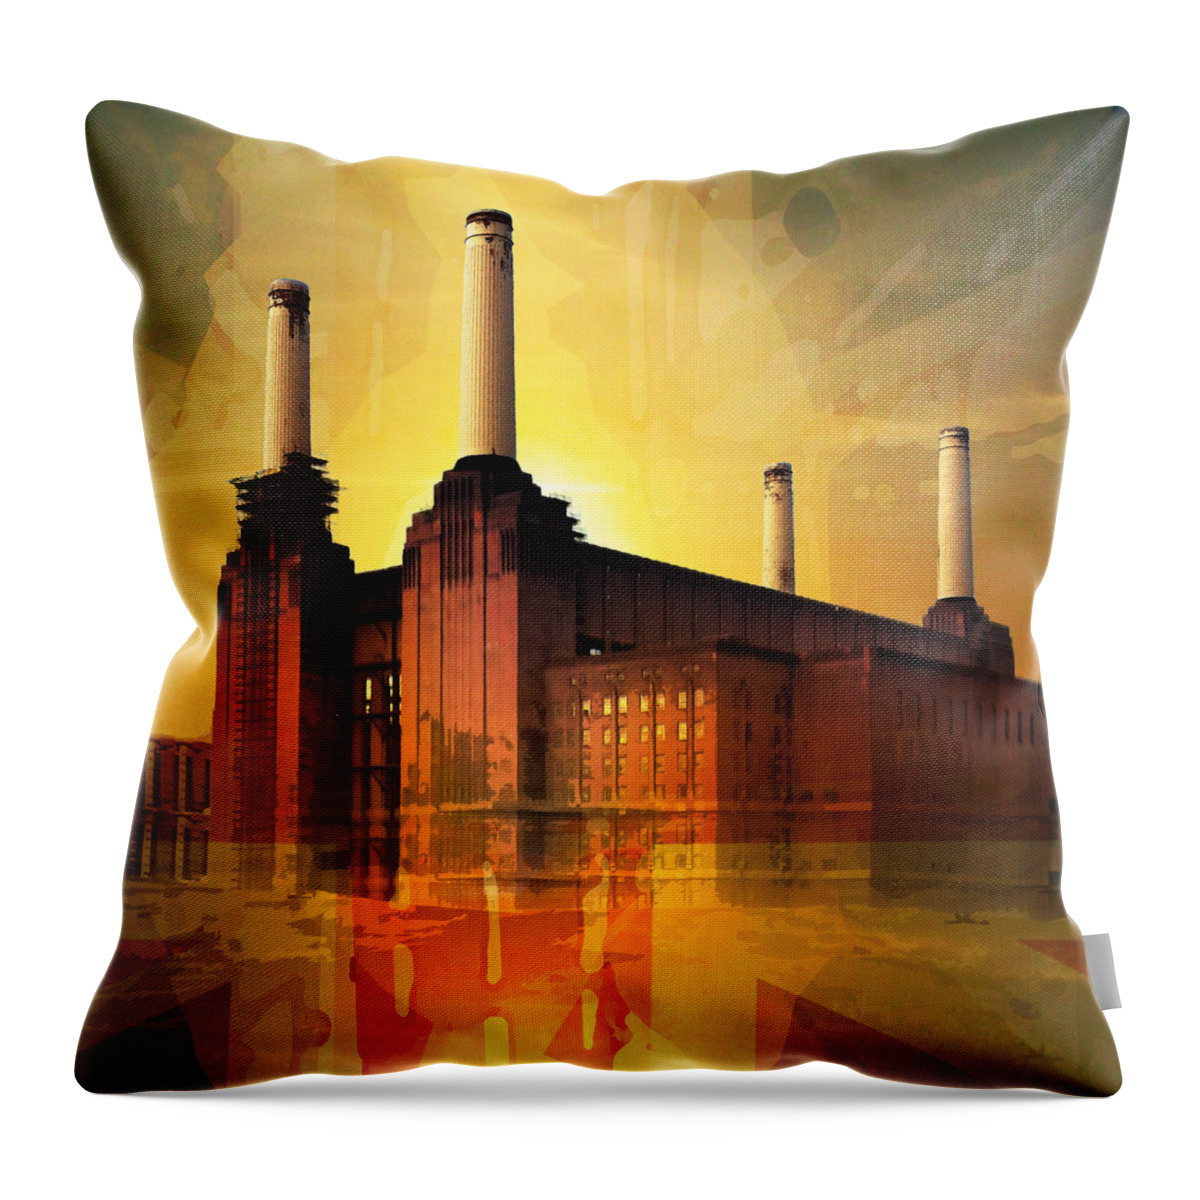 Battersea Throw Pillow featuring the photograph Splattersea Square 2014 by Big Fat Arts